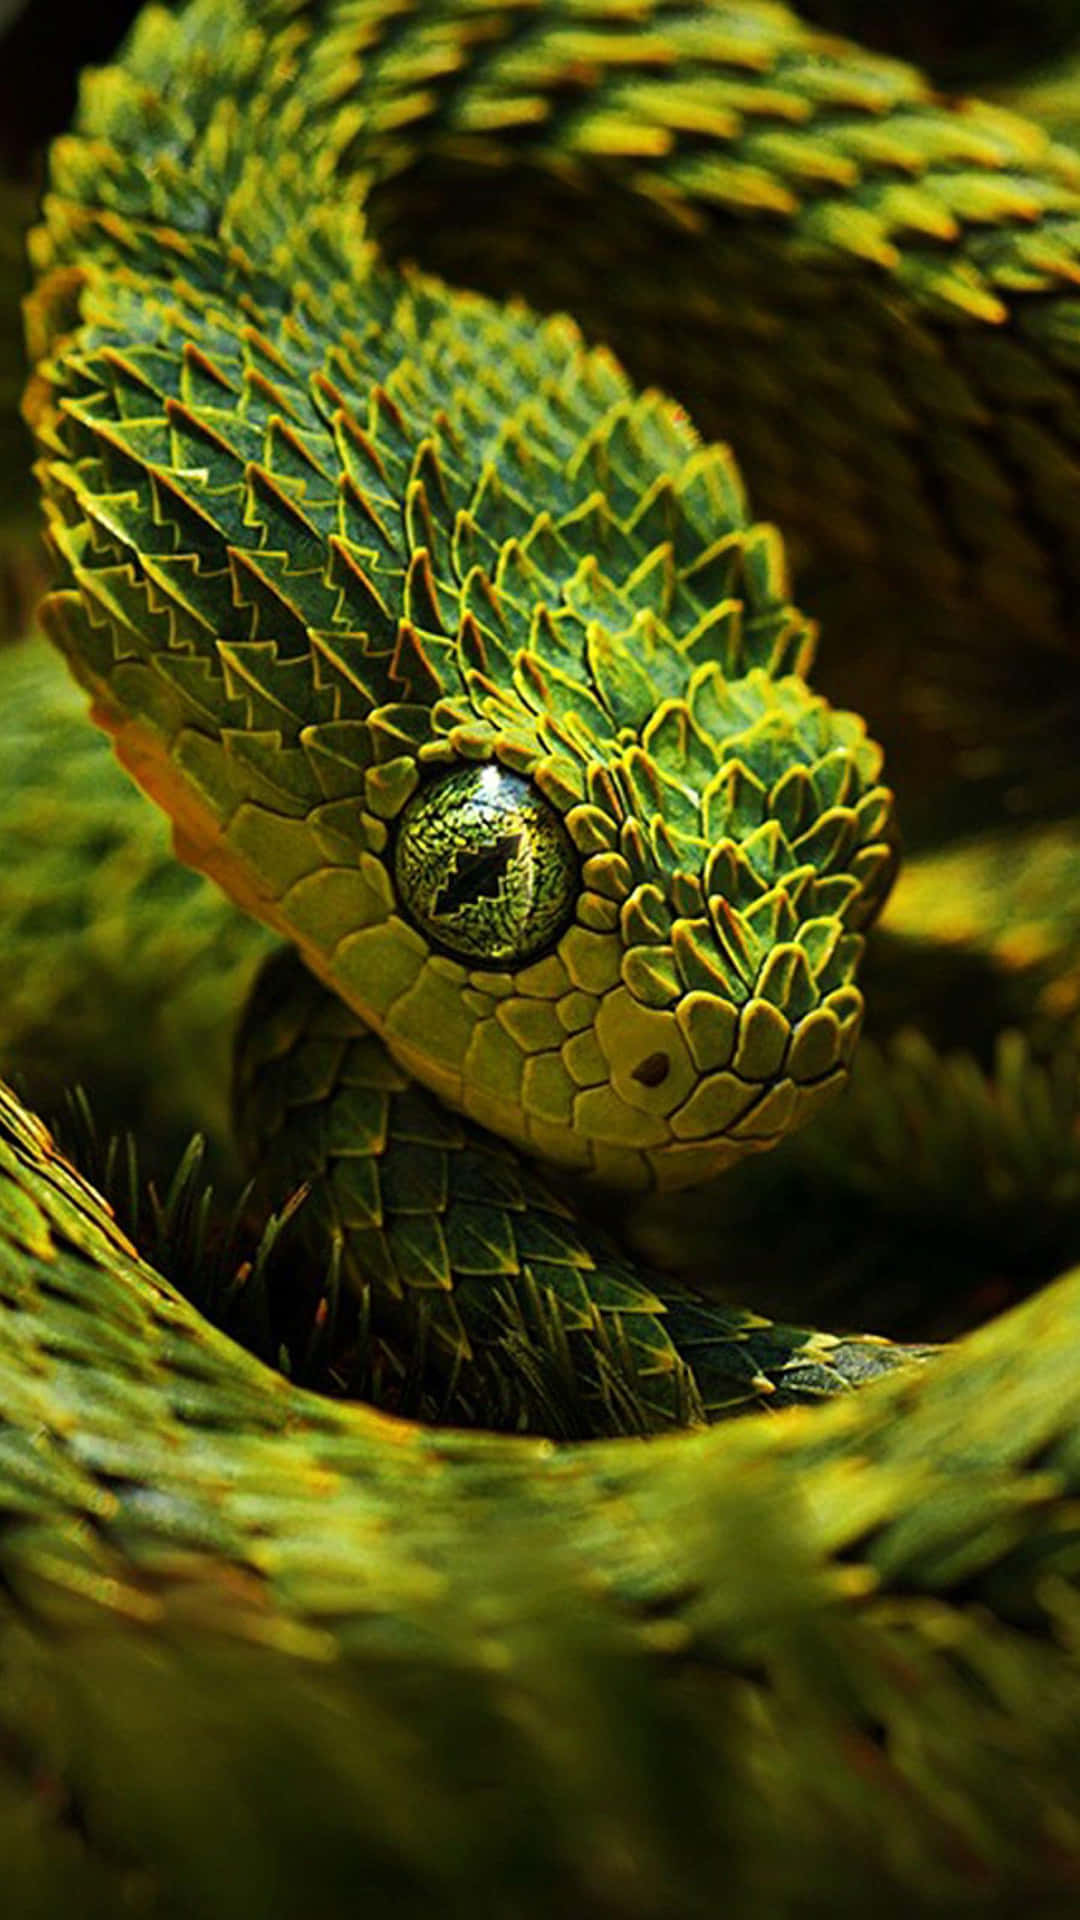 A breathtakingly cool snake slithers along the ground. Wallpaper